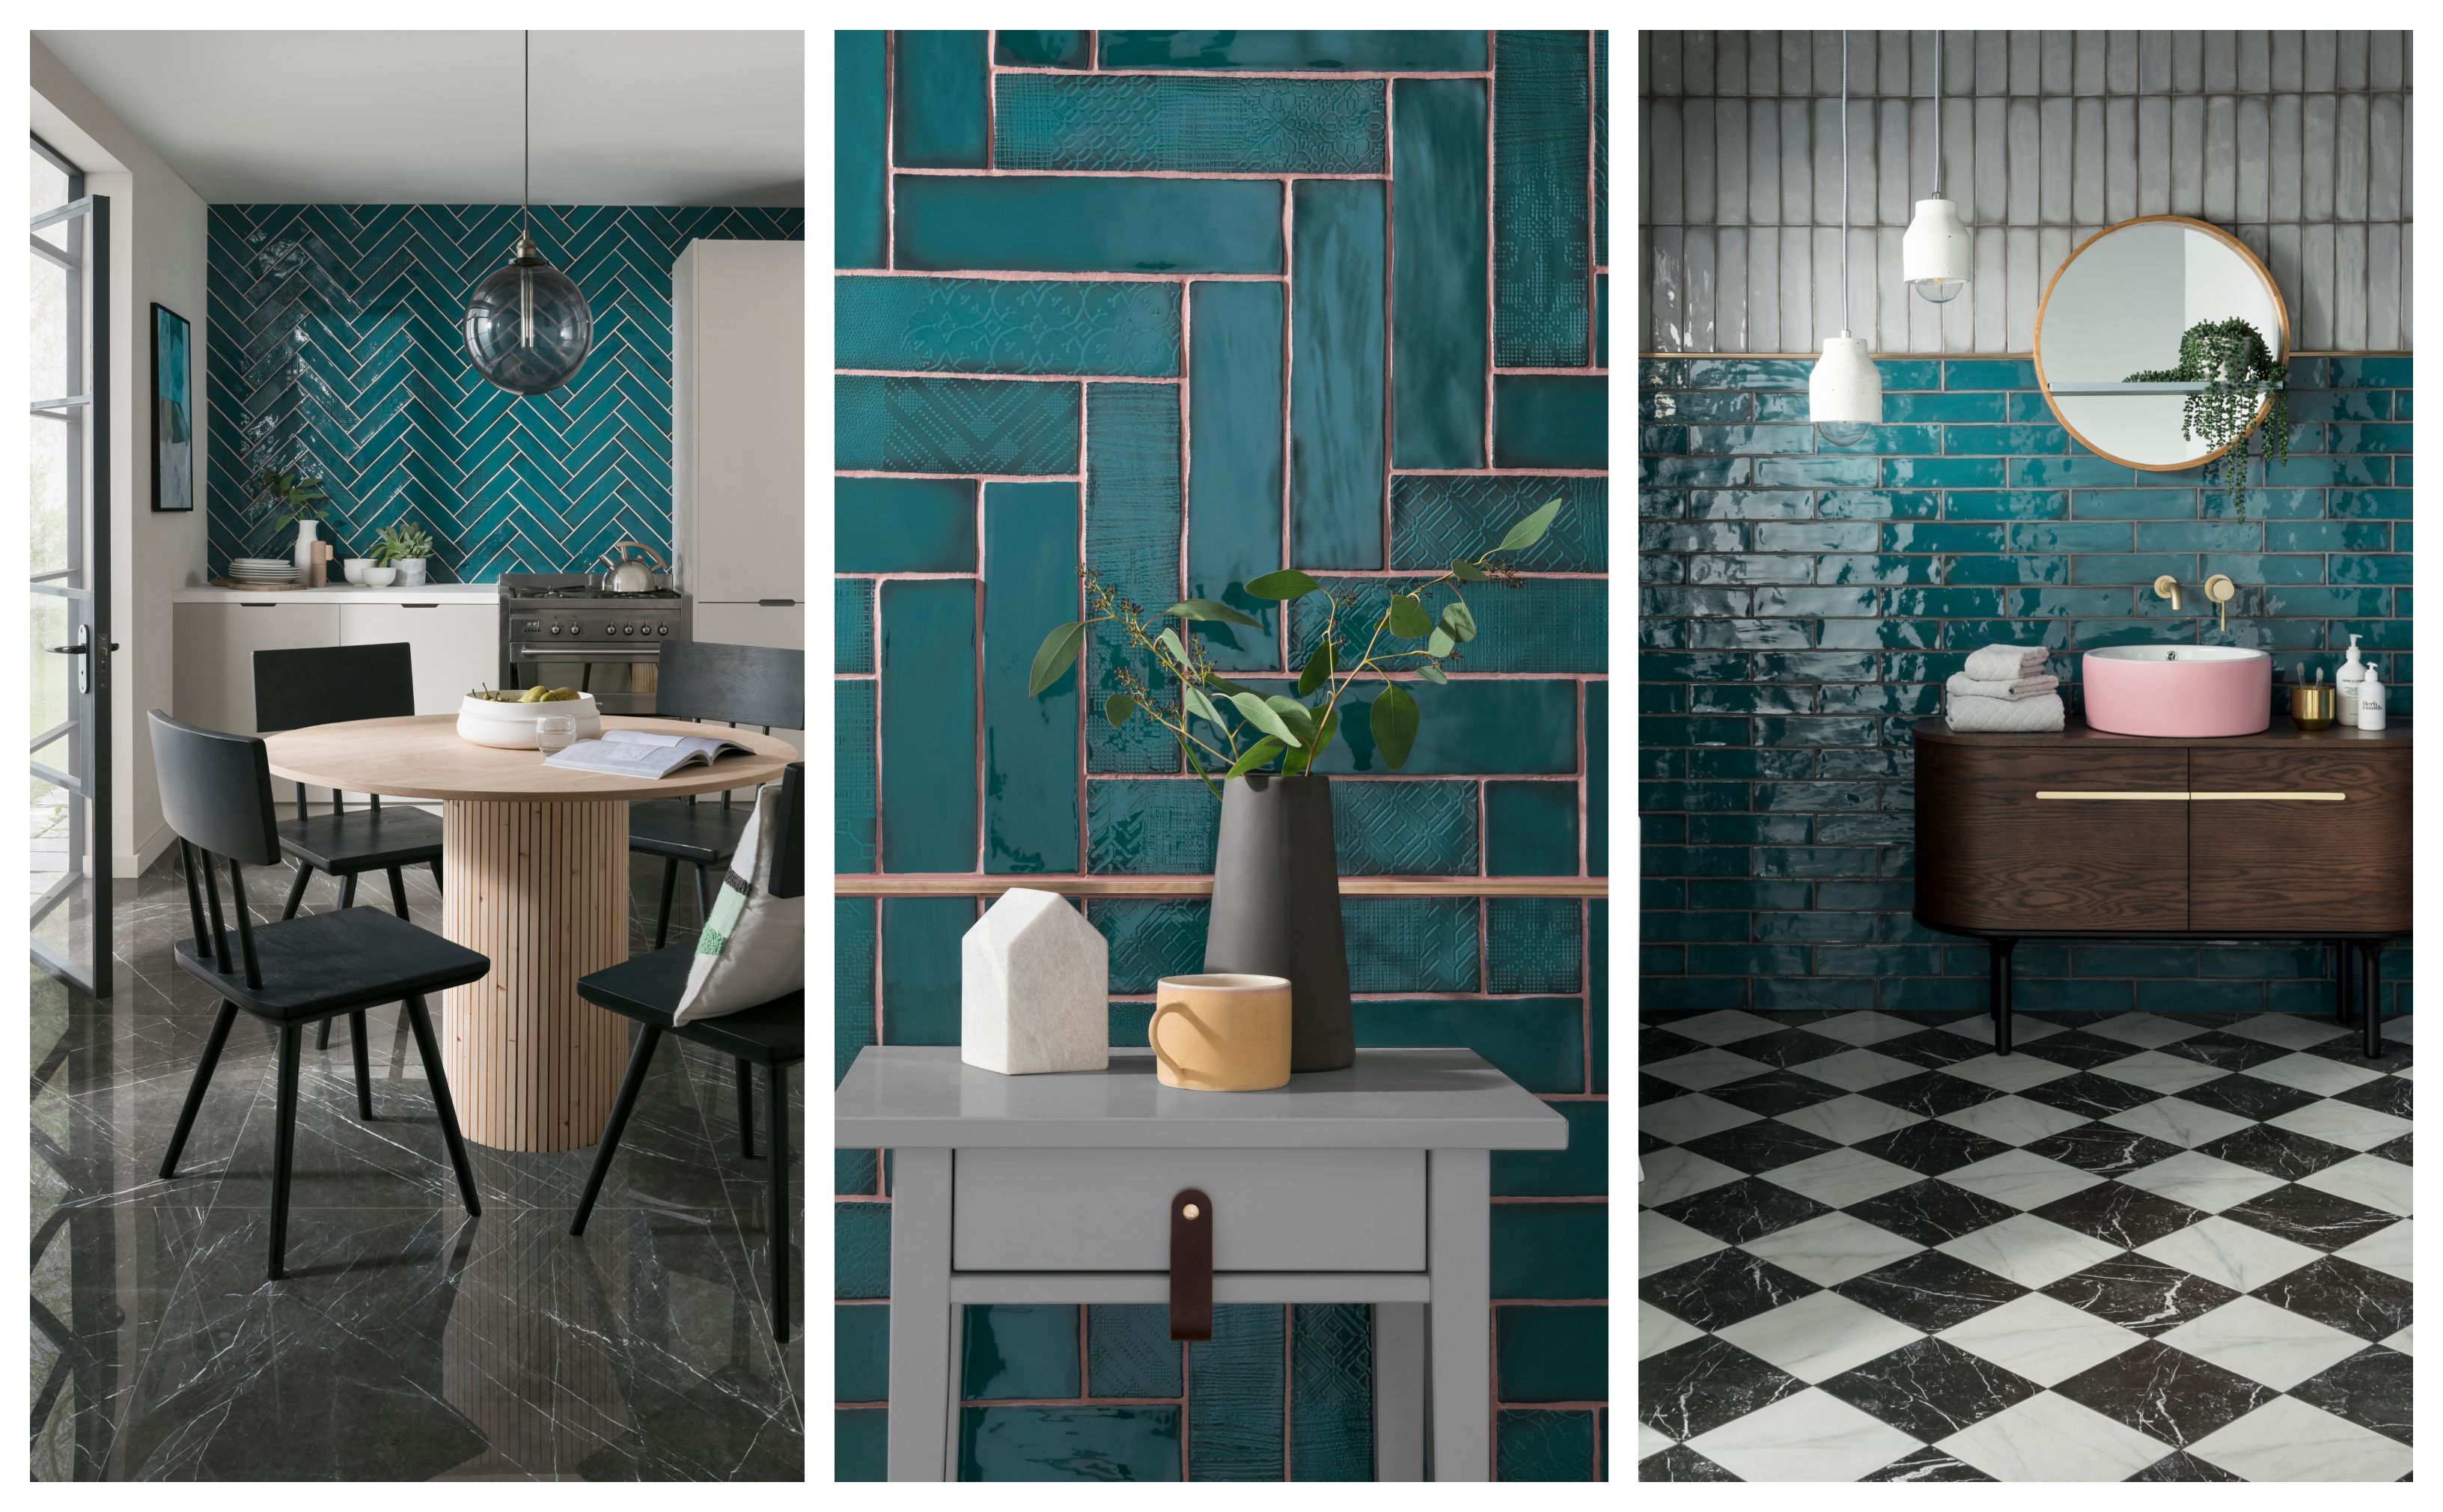 Tiles: Lampas Peacock unveiled as Tile the Year 2019 - Wall